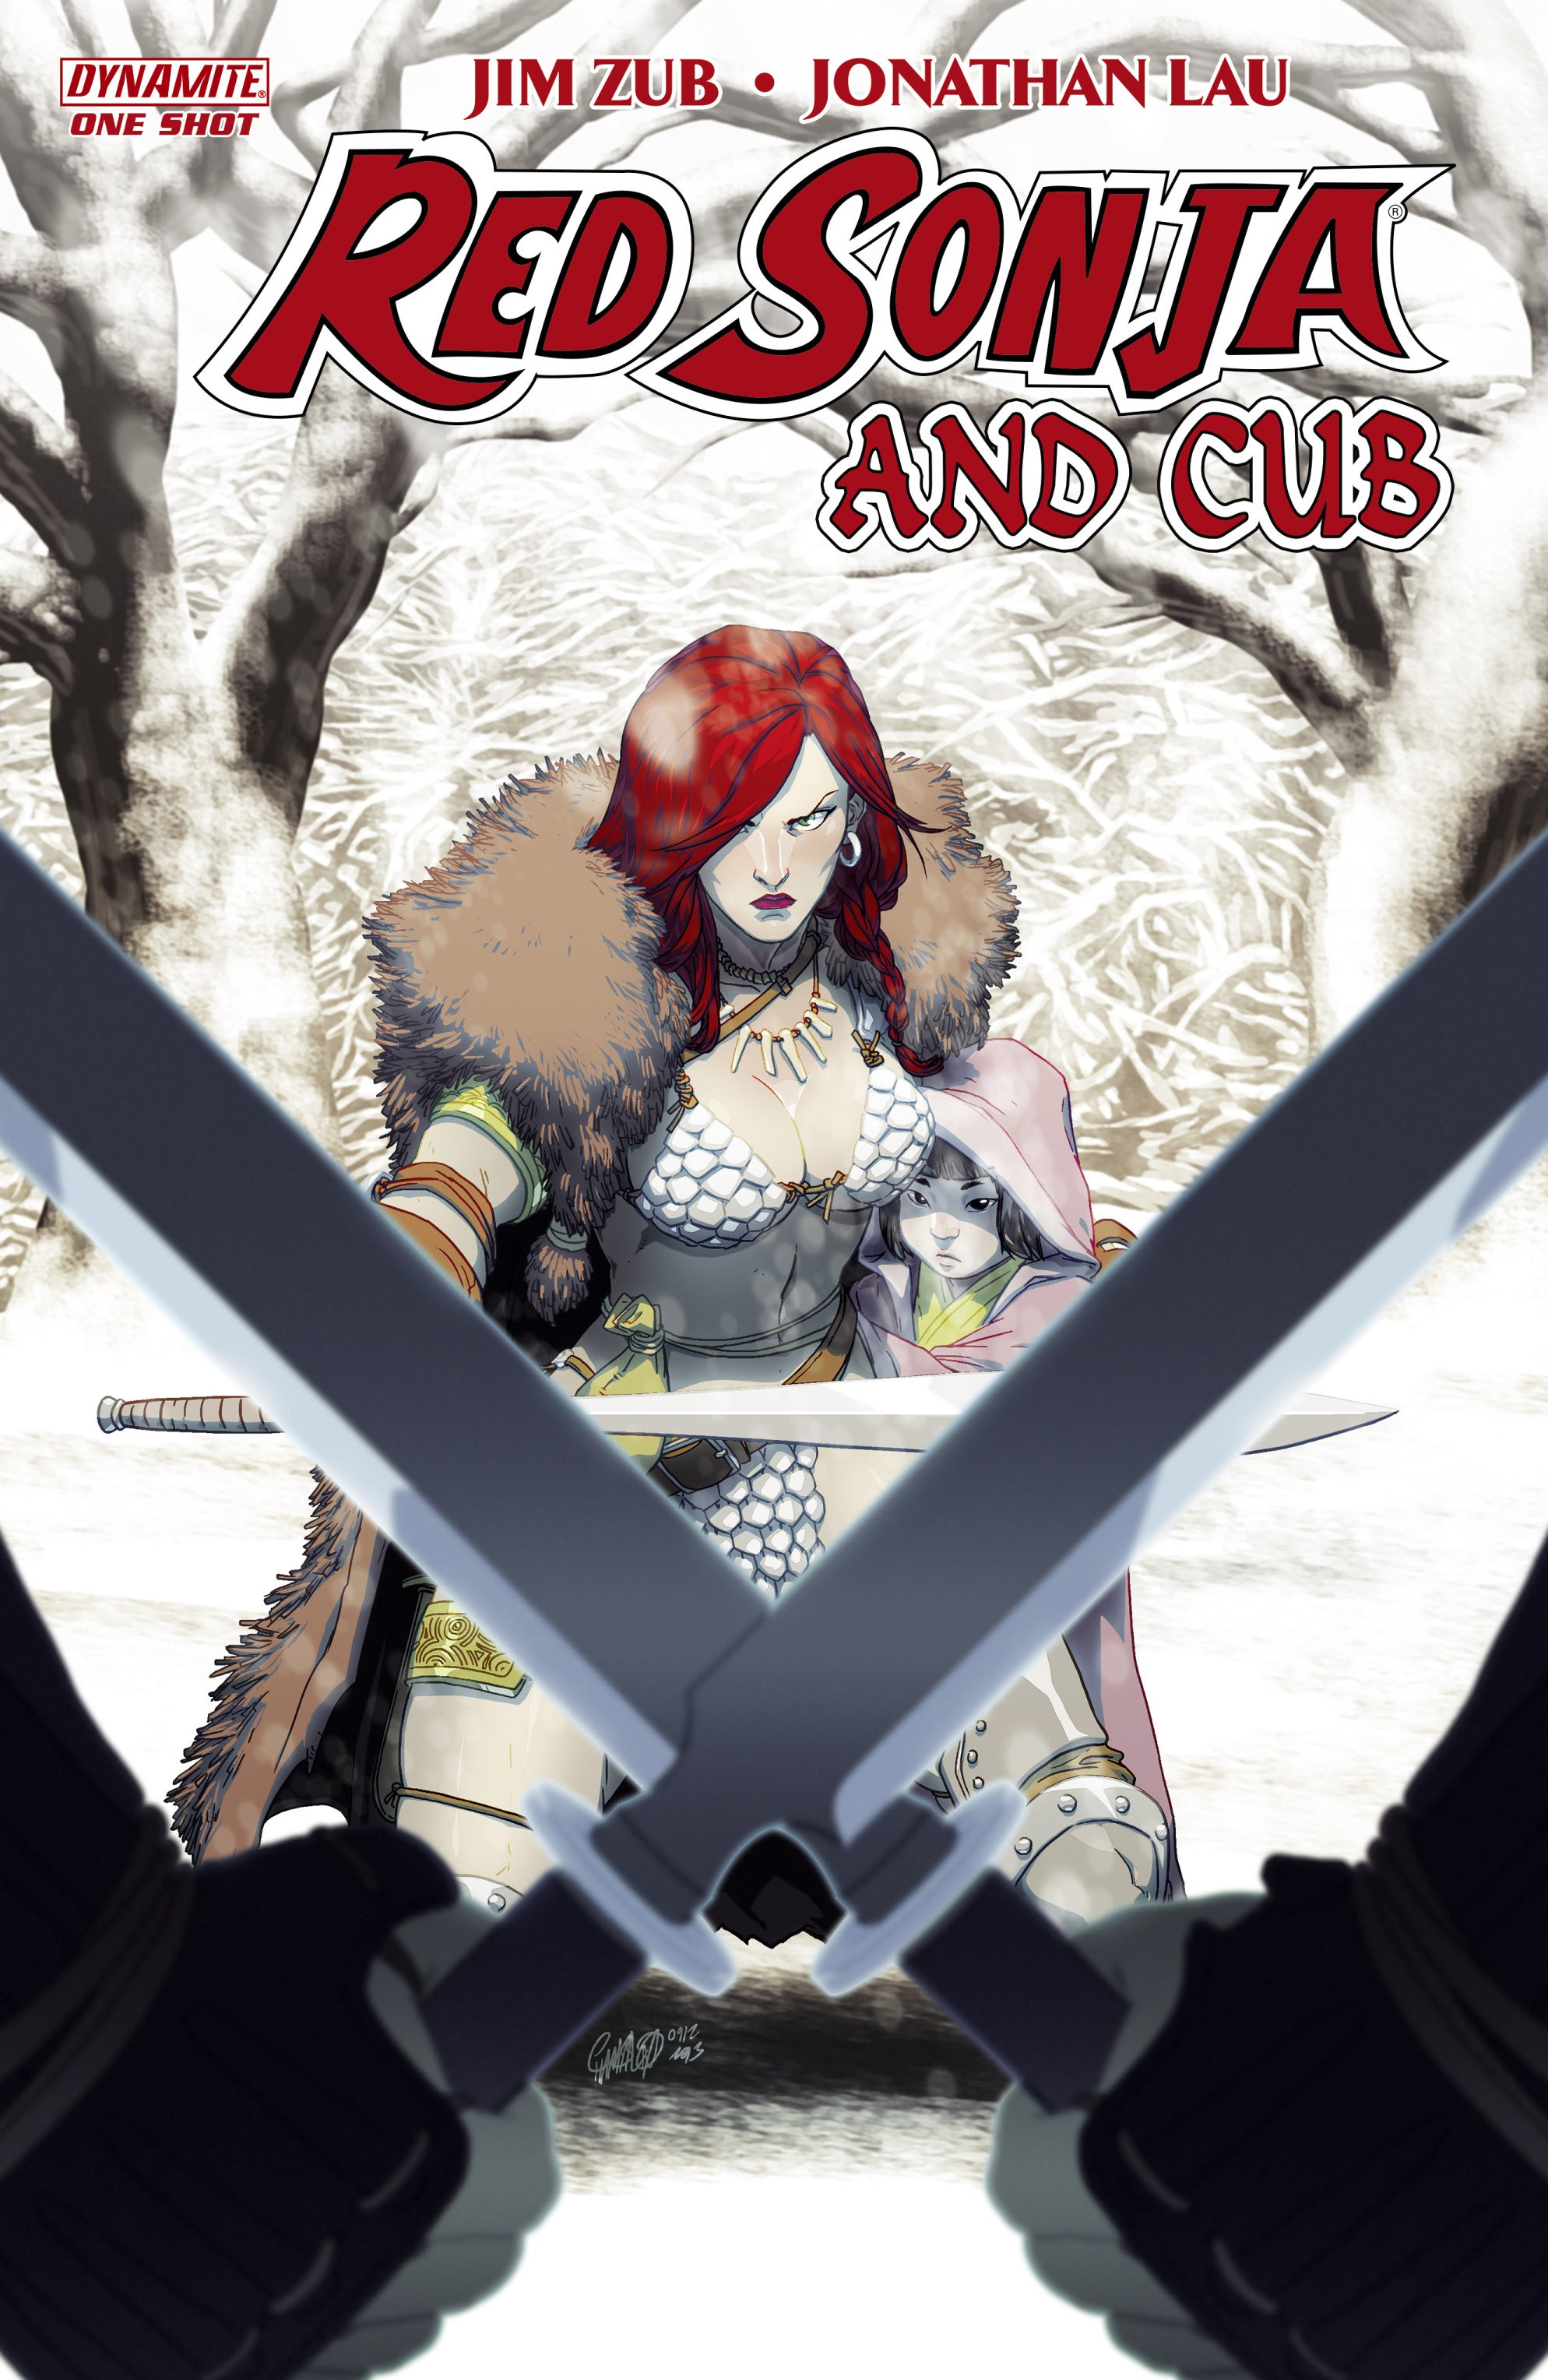 Read online Red Sonja and Cub comic -  Issue # Full - 1